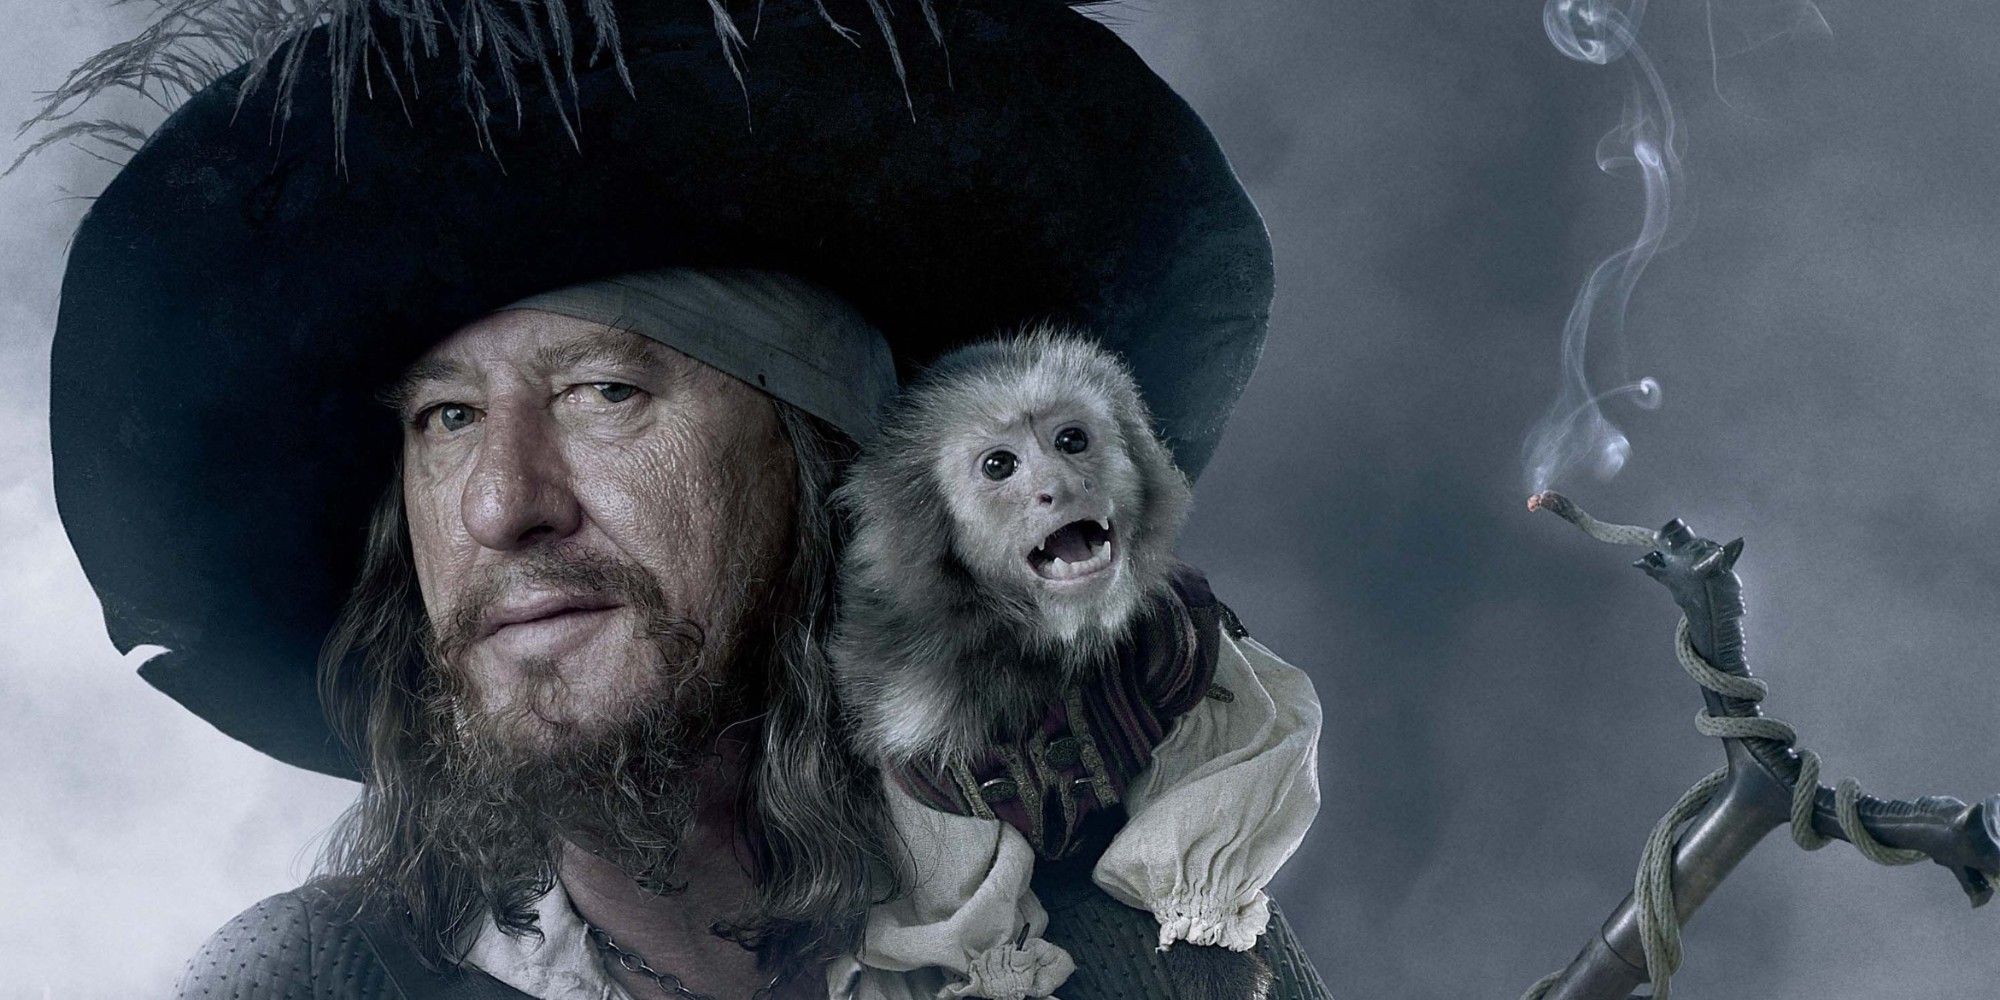 Pirates Of The Caribbean Monkey Gif : Pirates of the Caribbean: Why ...